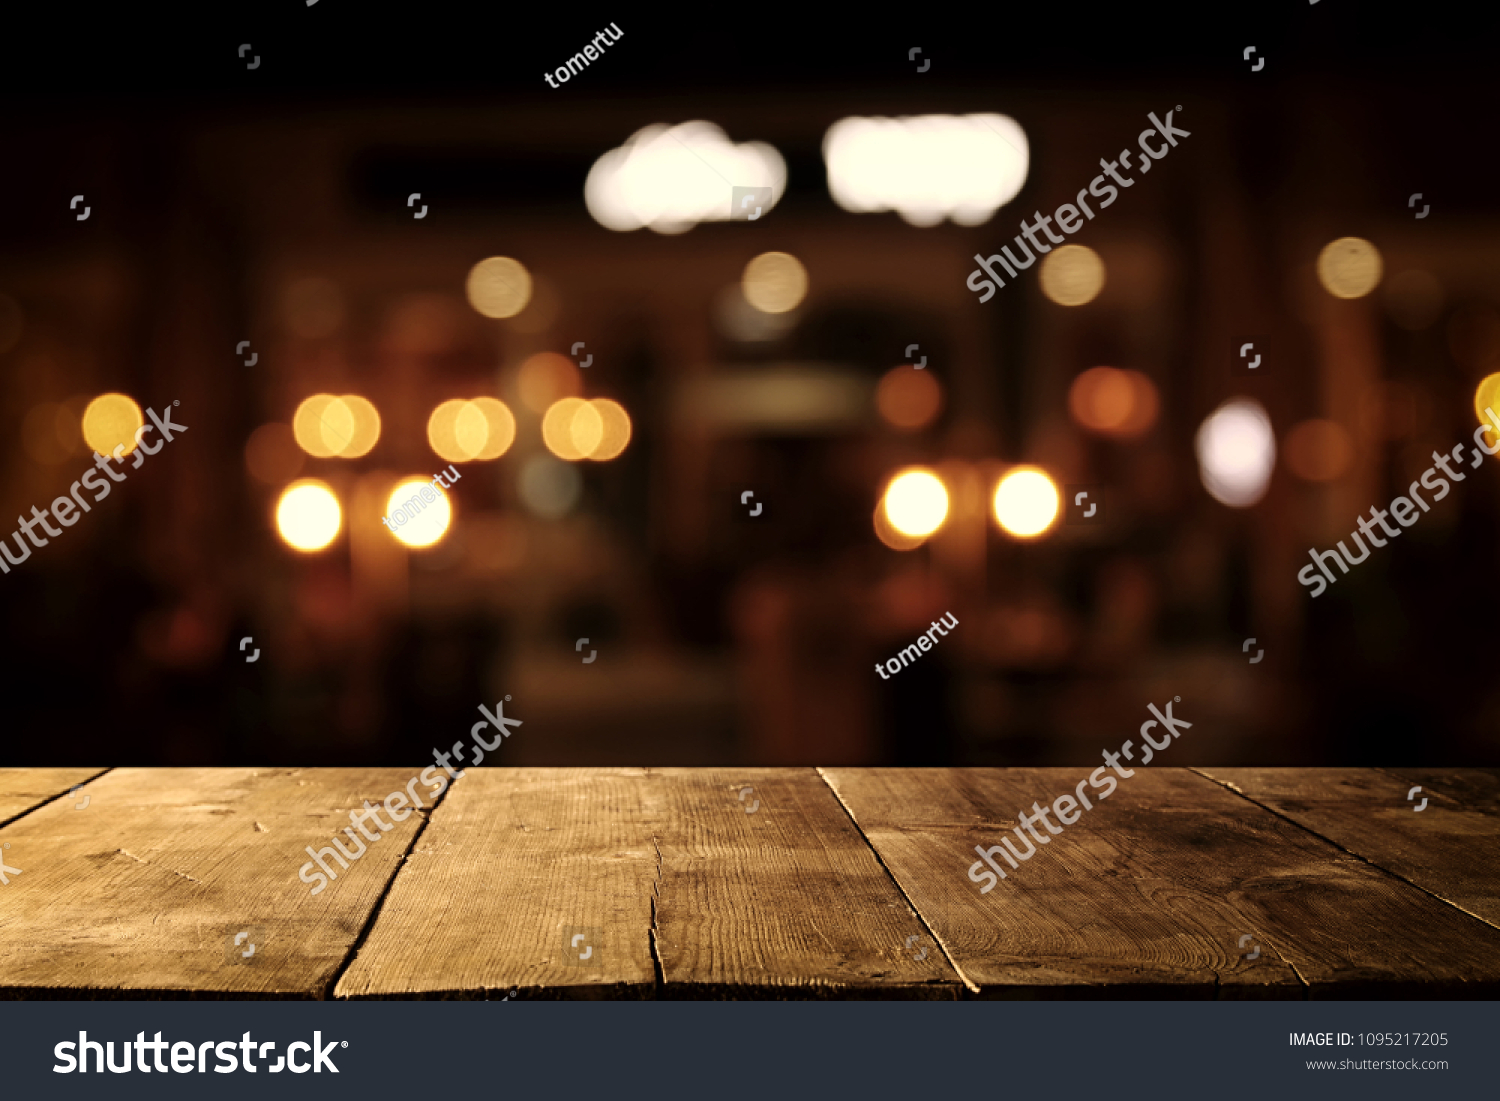 Image of wooden table in front of abstract blurred restaurant lights background #1095217205